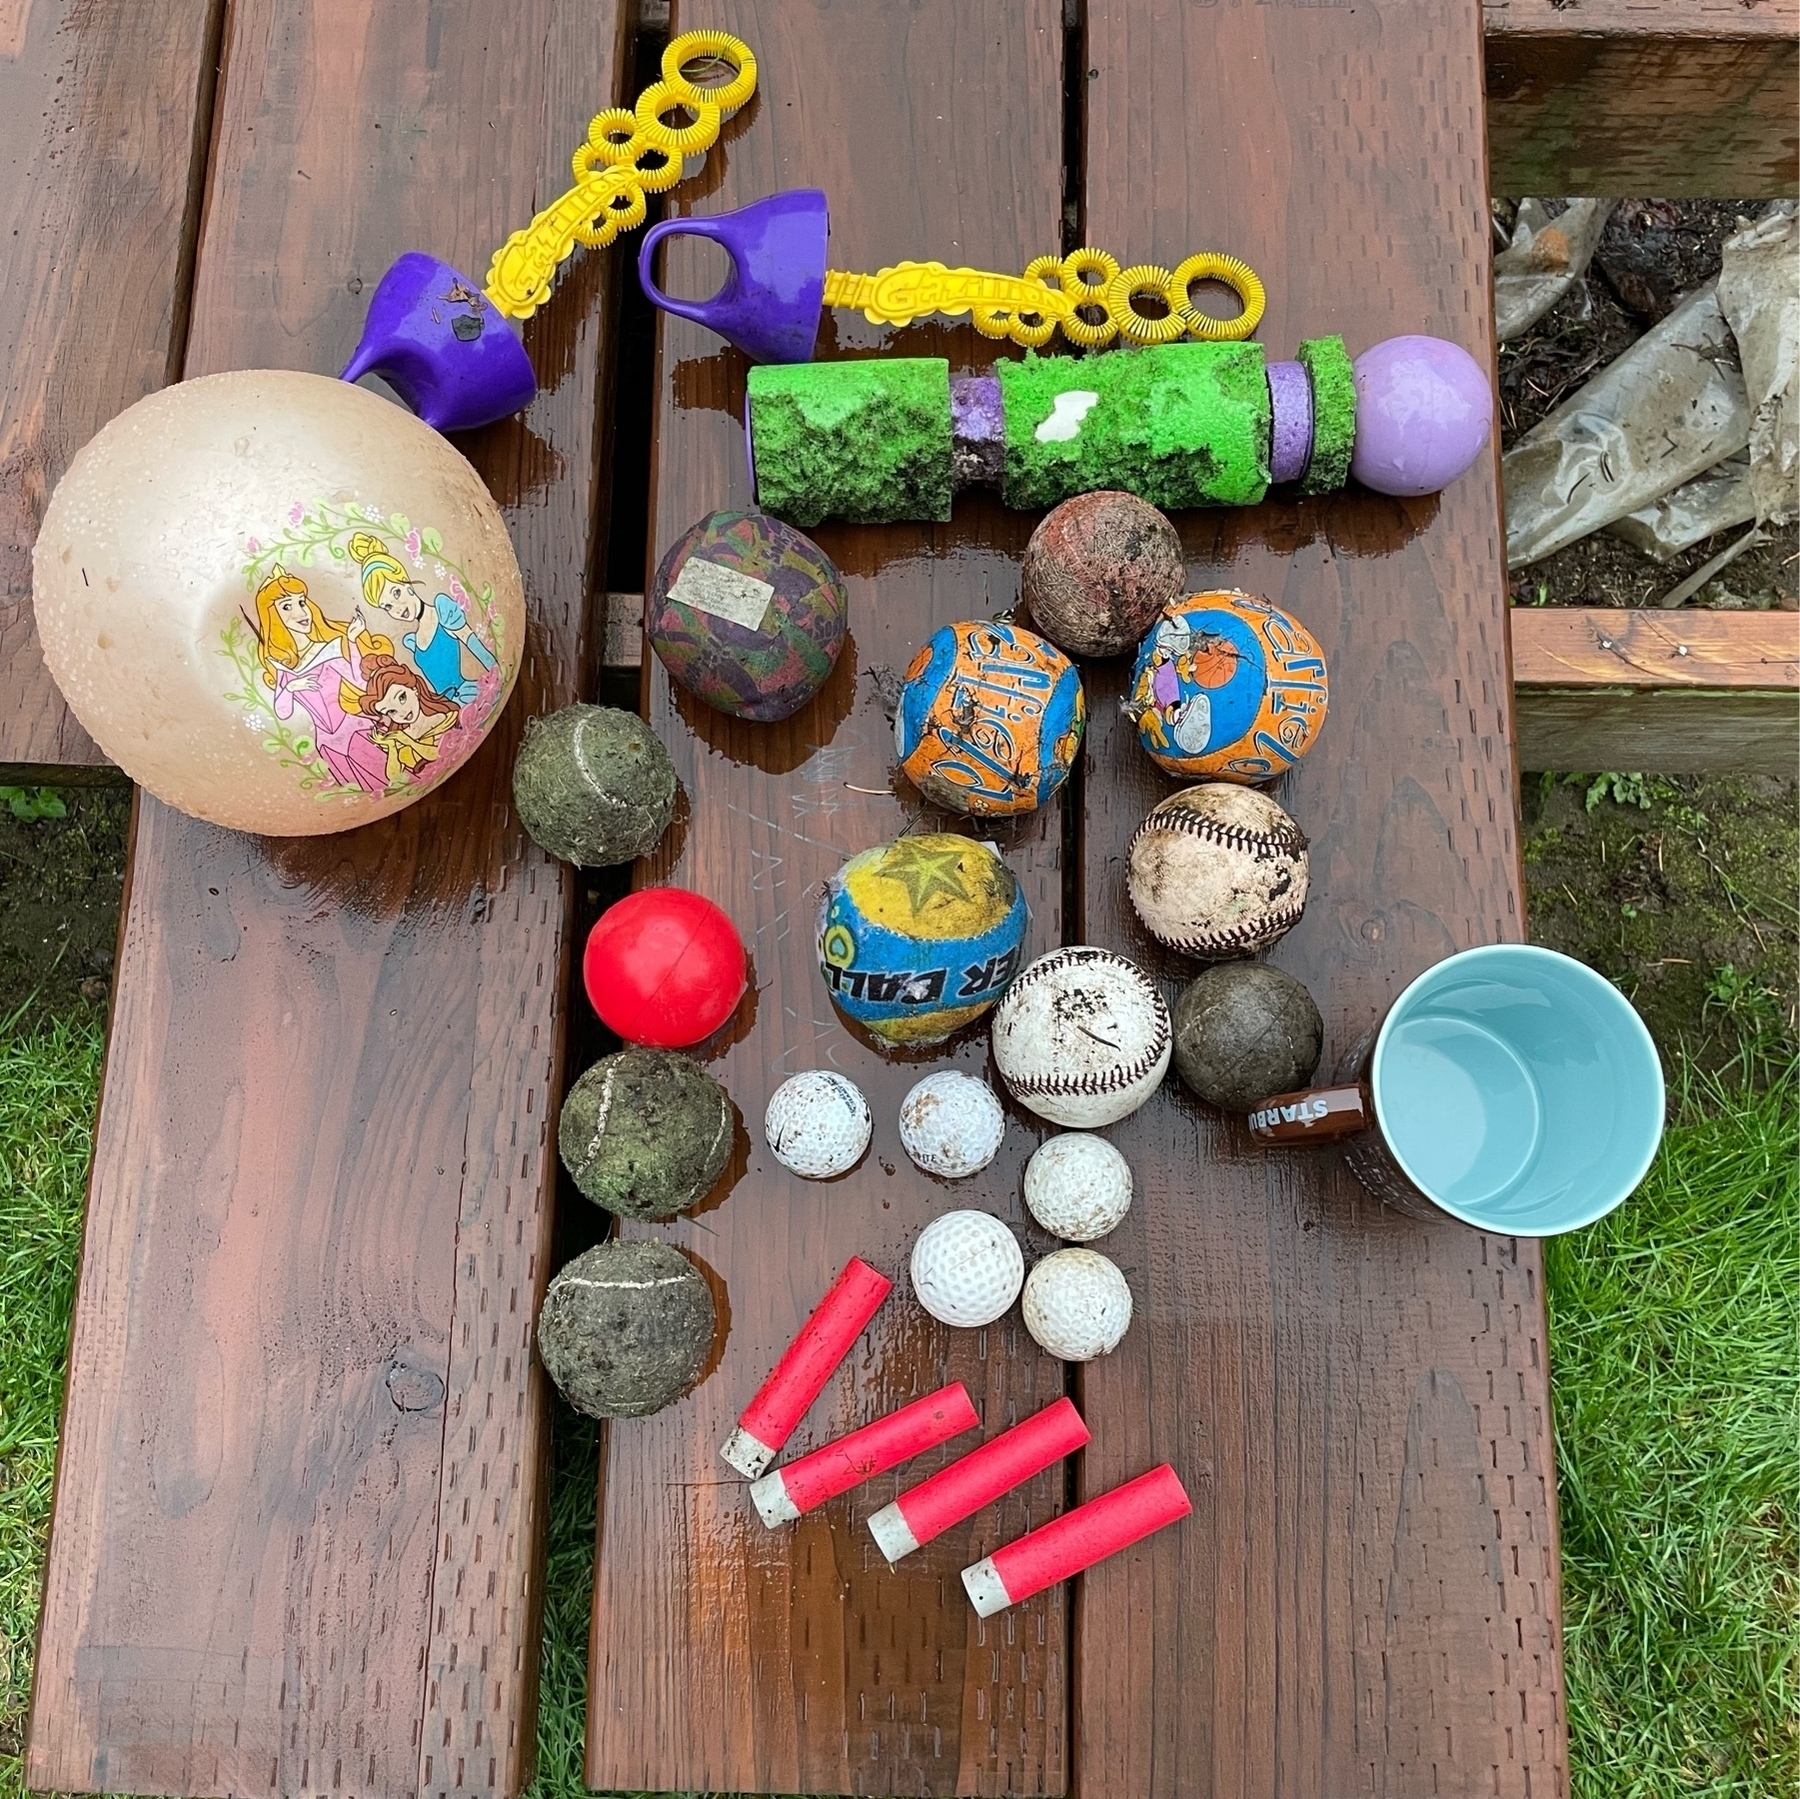 Overhead view of various balls, bubble wands, Nerf darts, and a coffee mug